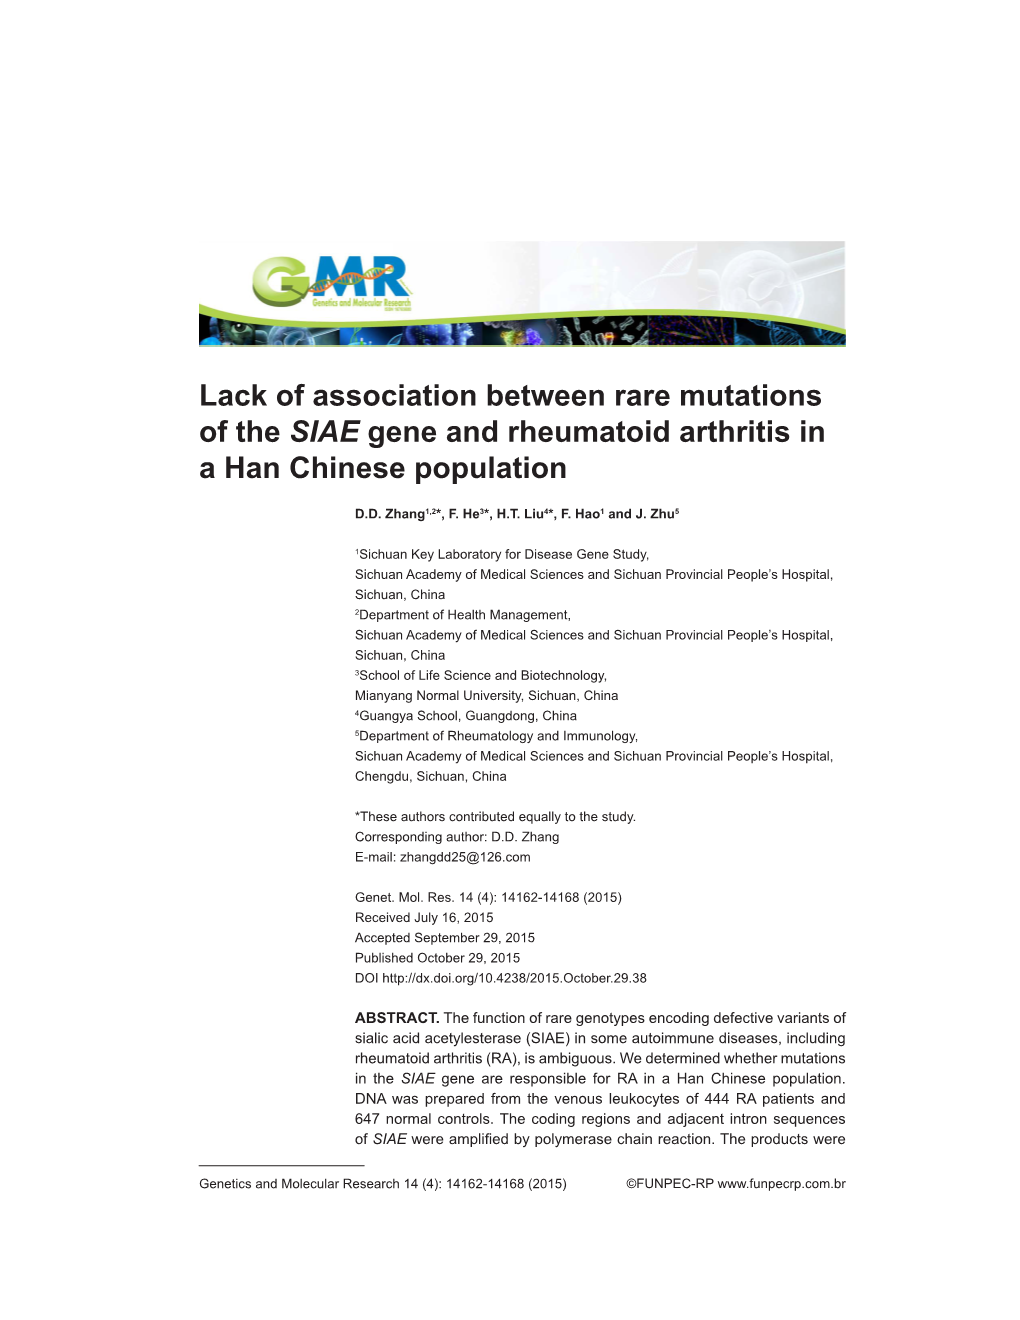 Lack of Association Between Rare Mutations of the SIAE Gene and Rheumatoid Arthritis in a Han Chinese Population